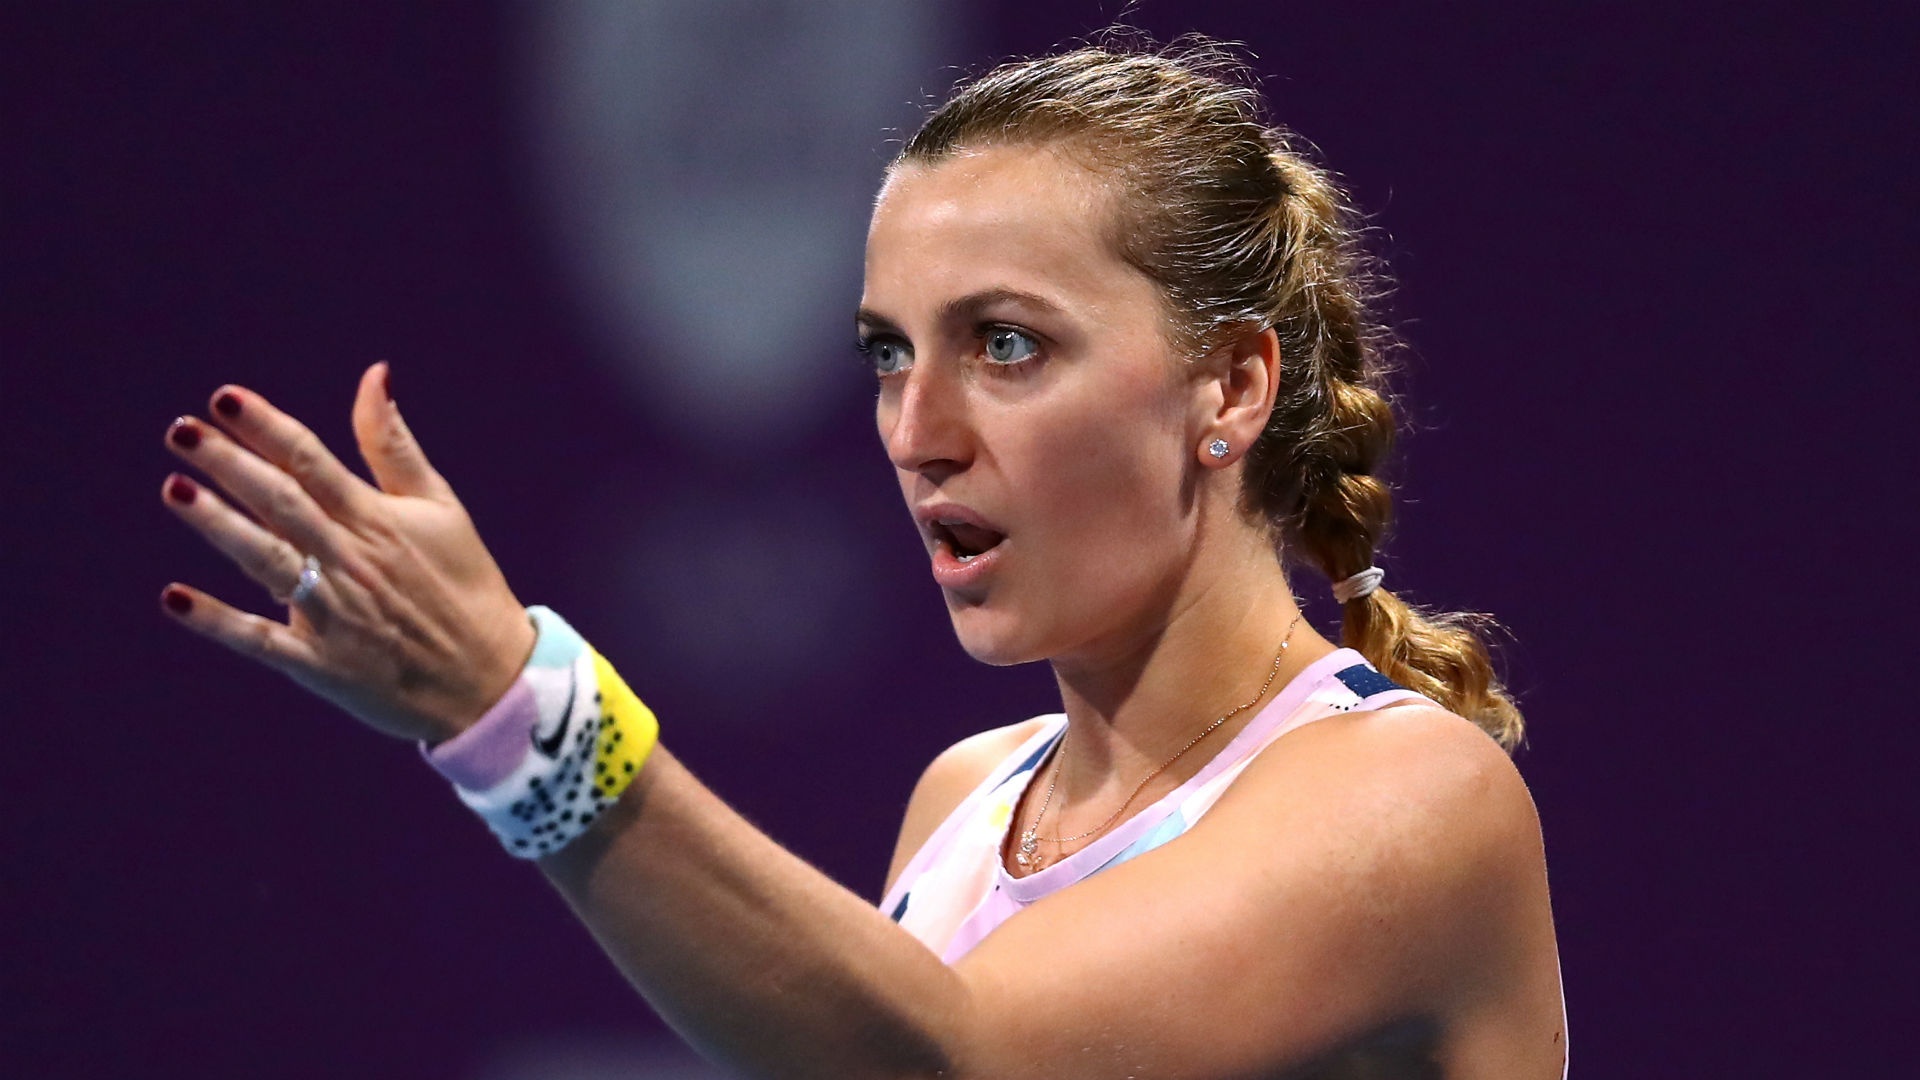 Petra Kvitova believes Grand Slams without fans should not be played